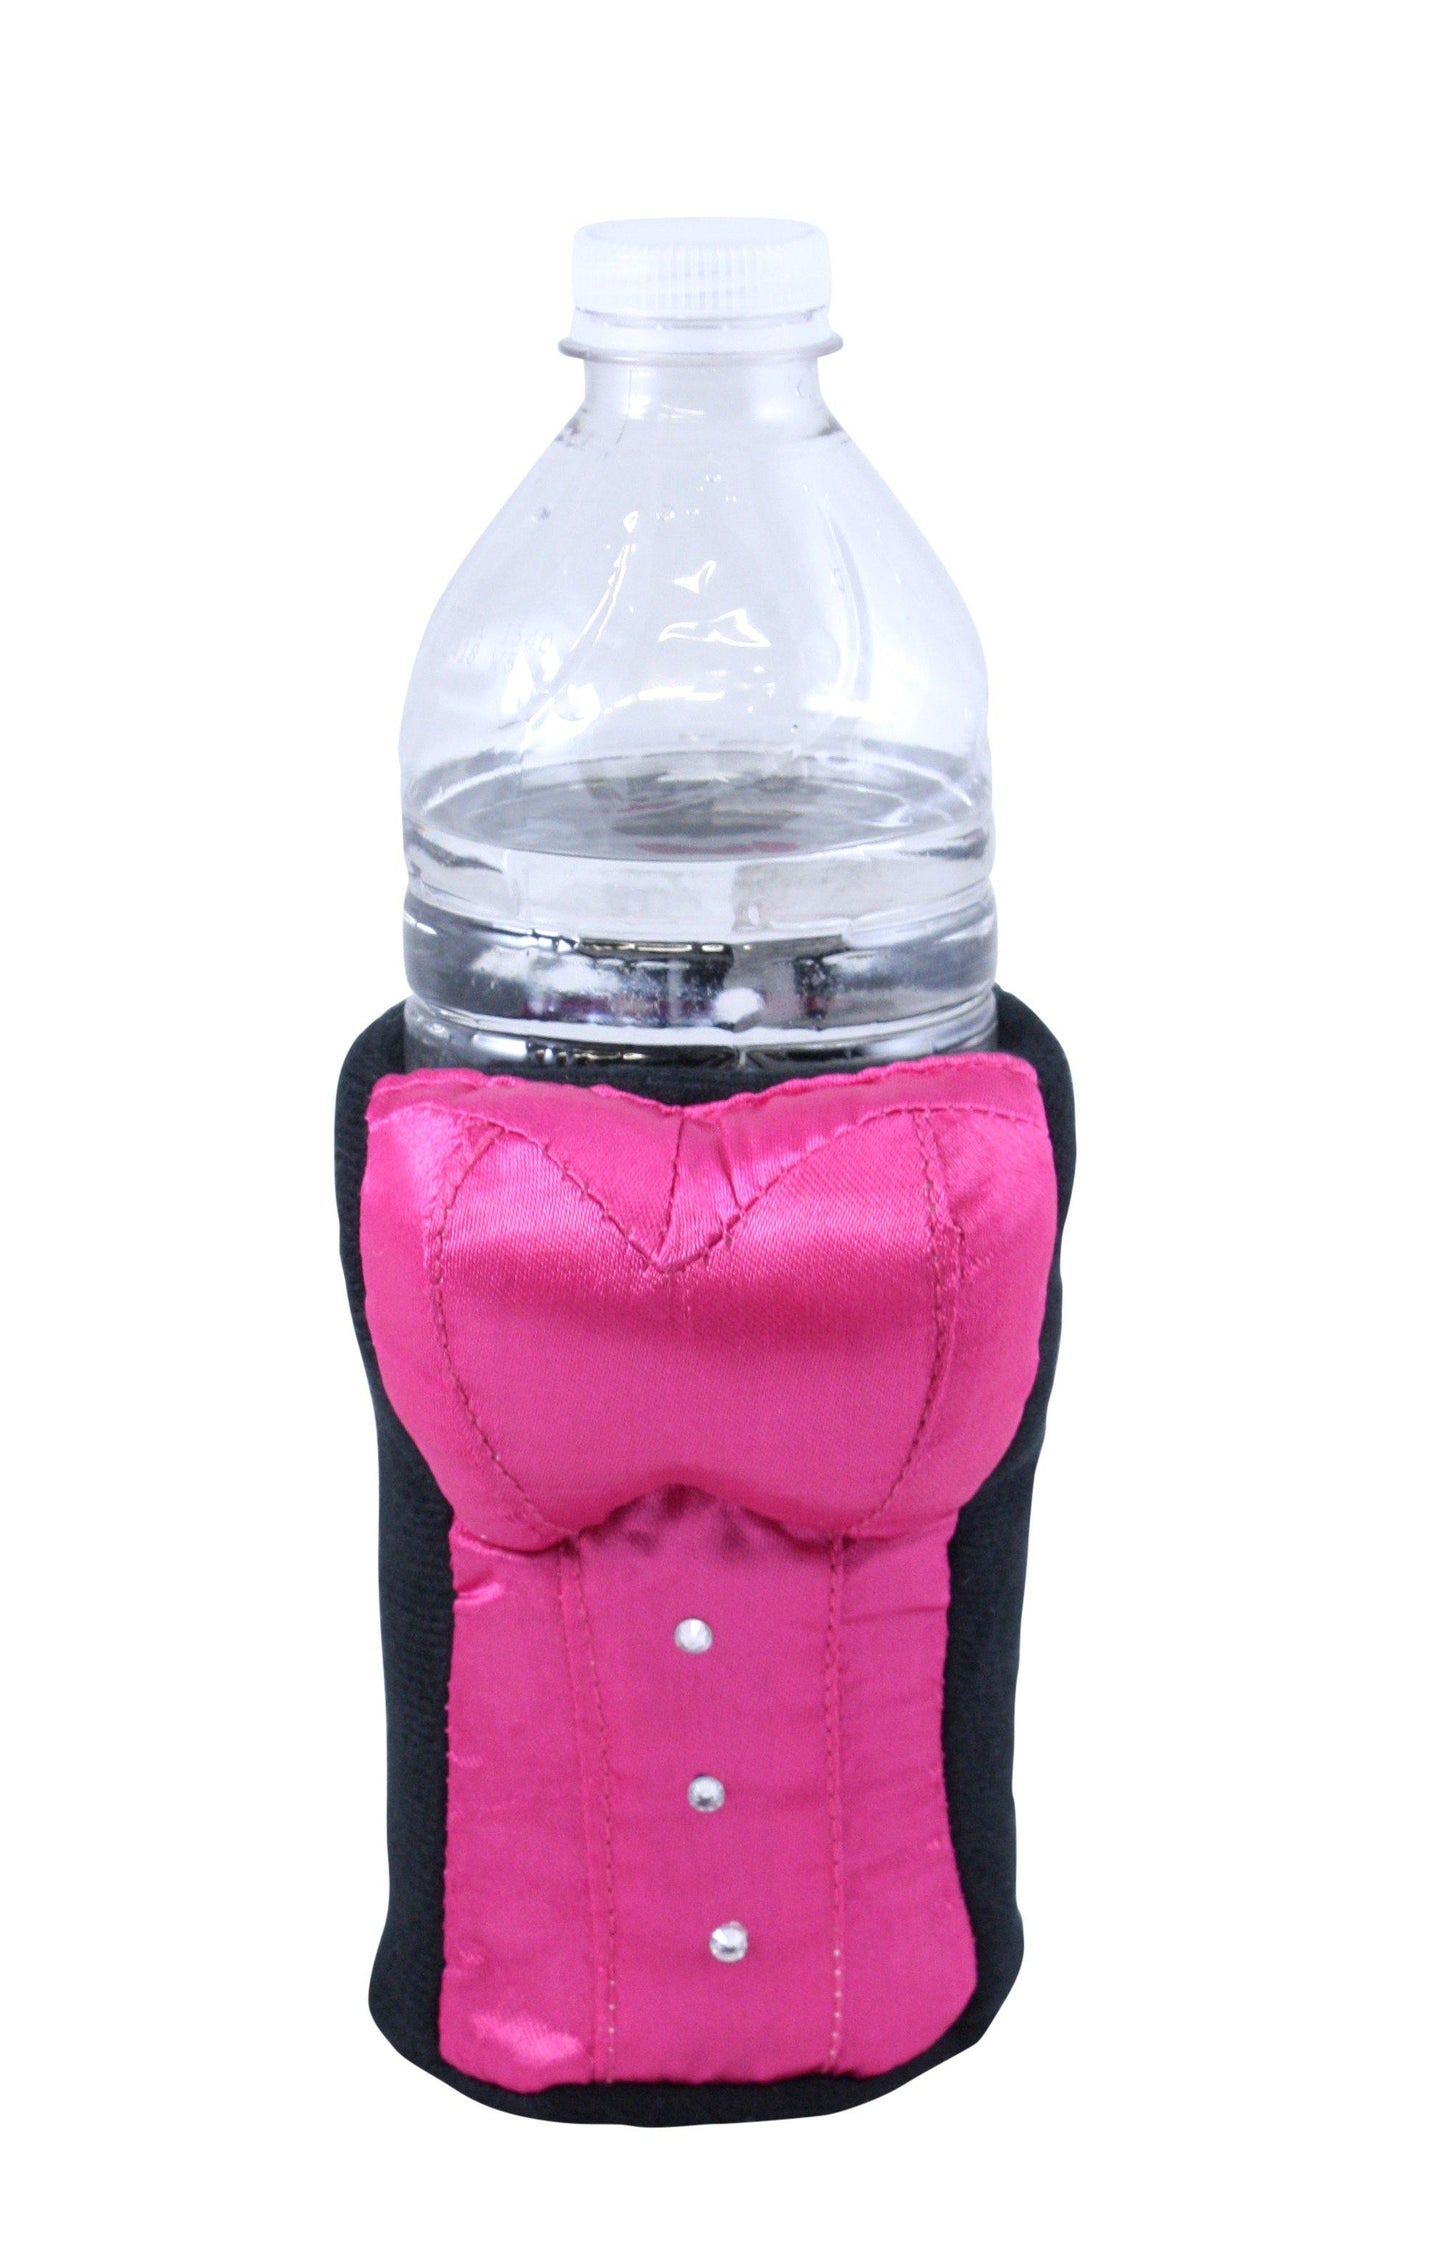 Corset Water Koozie by Tipsy Totes - holds most 16.9oz bottles